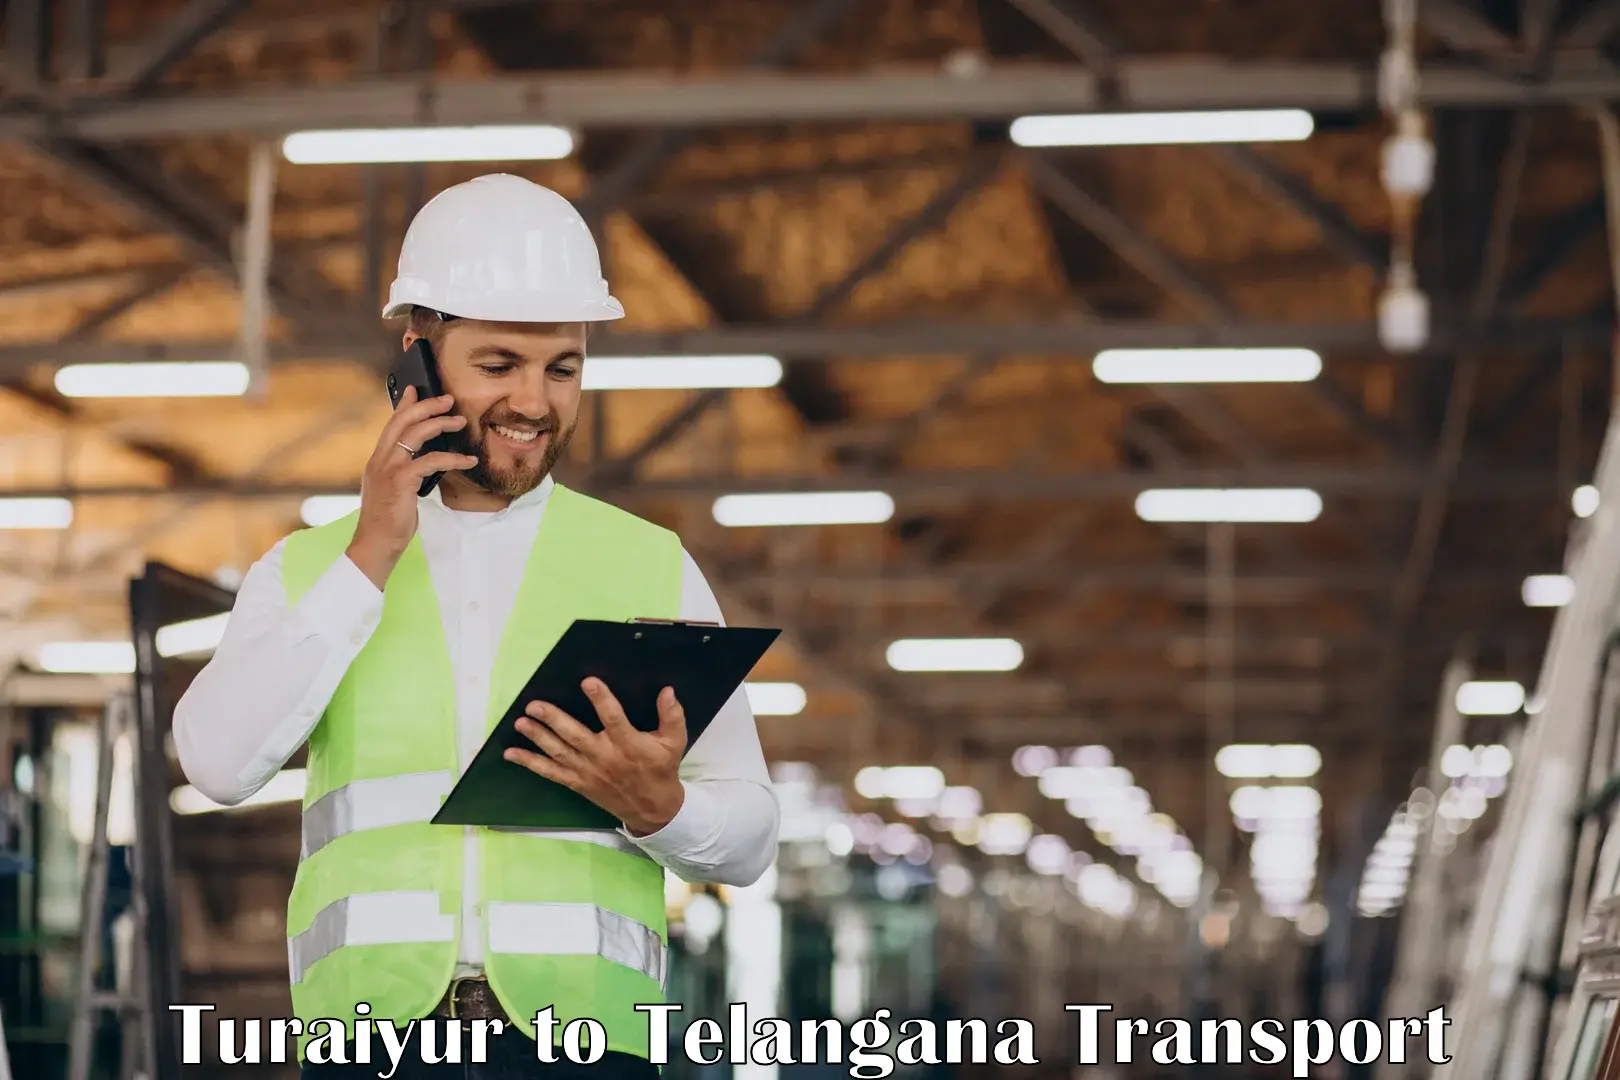 Container transport service Turaiyur to Nizamabad